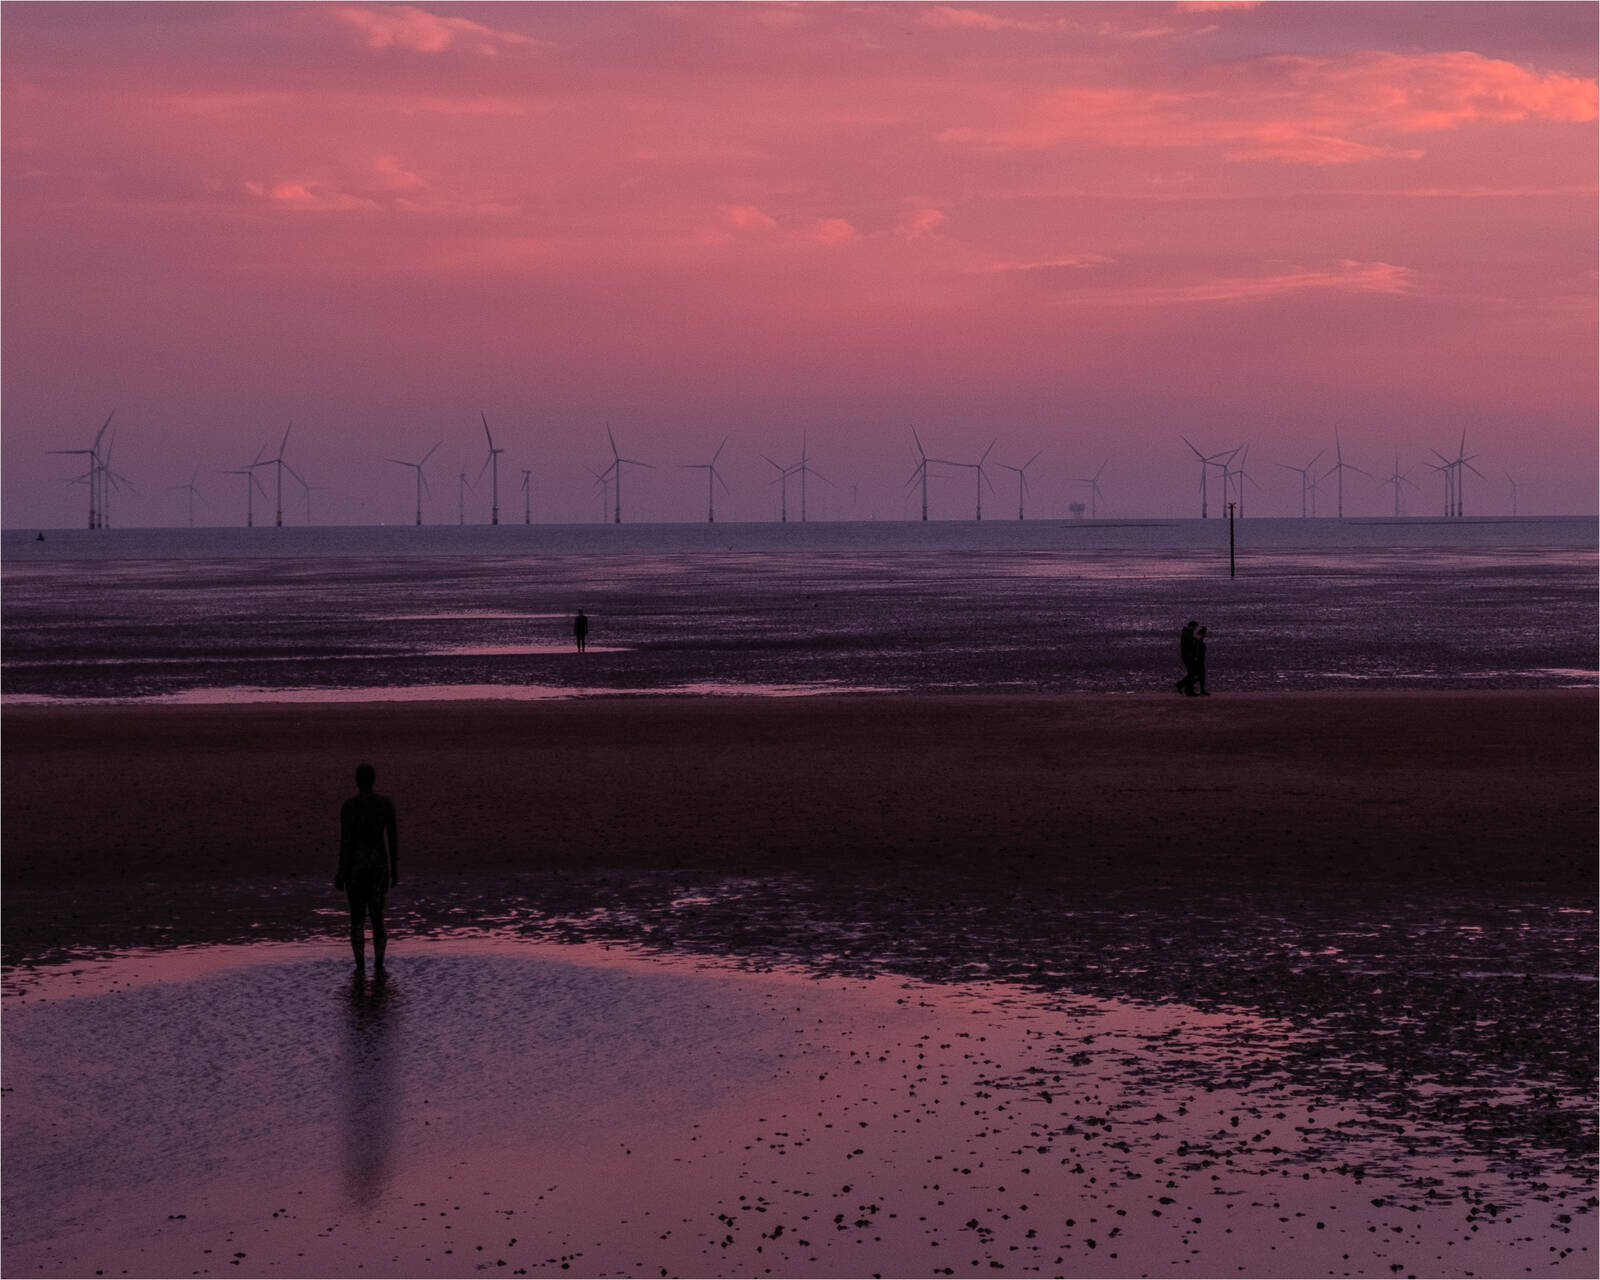 Image of Crosby Beach by jacqui prout